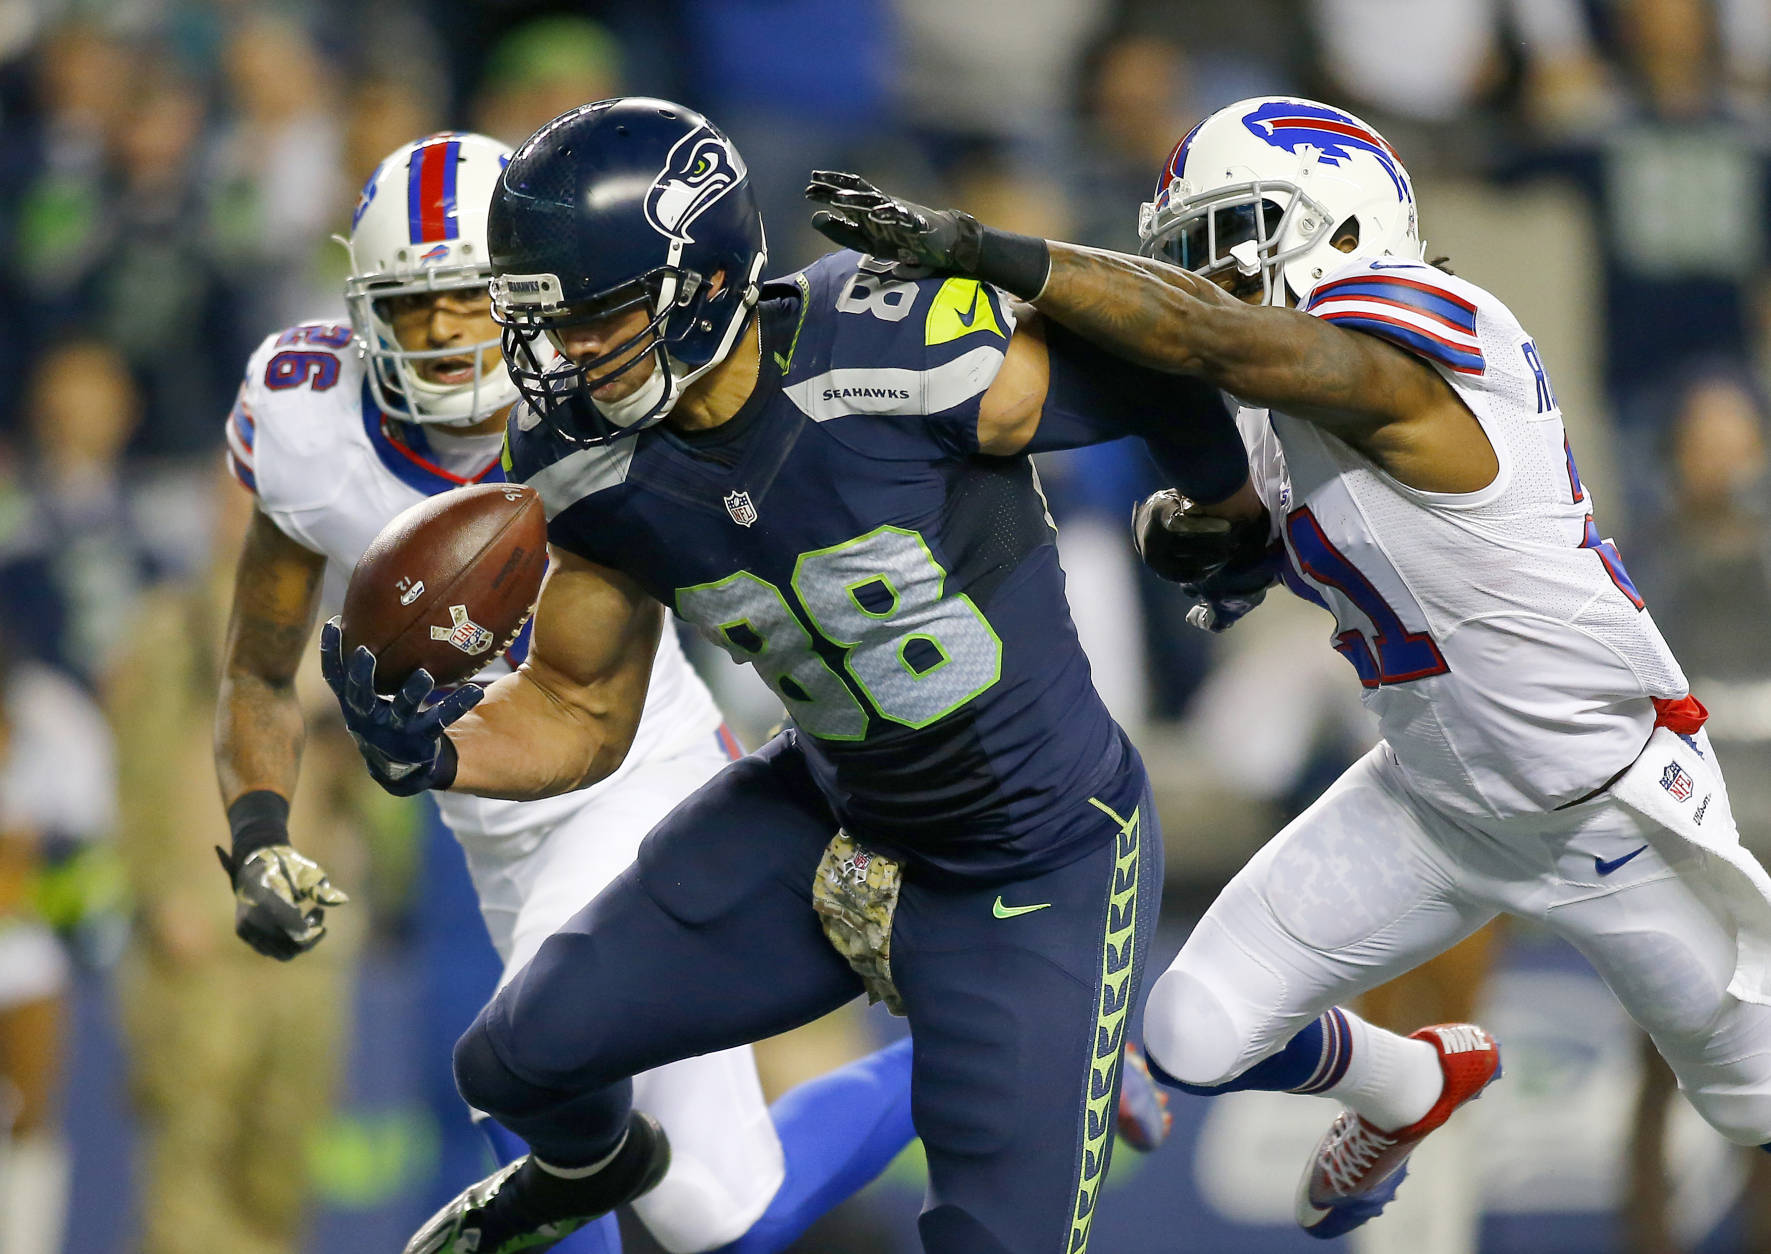 SEATTLE, WA - NOVEMBER 07:  Tight end Jimmy Graham #88 of the Seattle Seahawks brings in a touchdown against the Buffalo Bills at CenturyLink Field on November 7, 2016 in Seattle, Washington.  (Photo by Jonathan Ferrey/Getty Images)